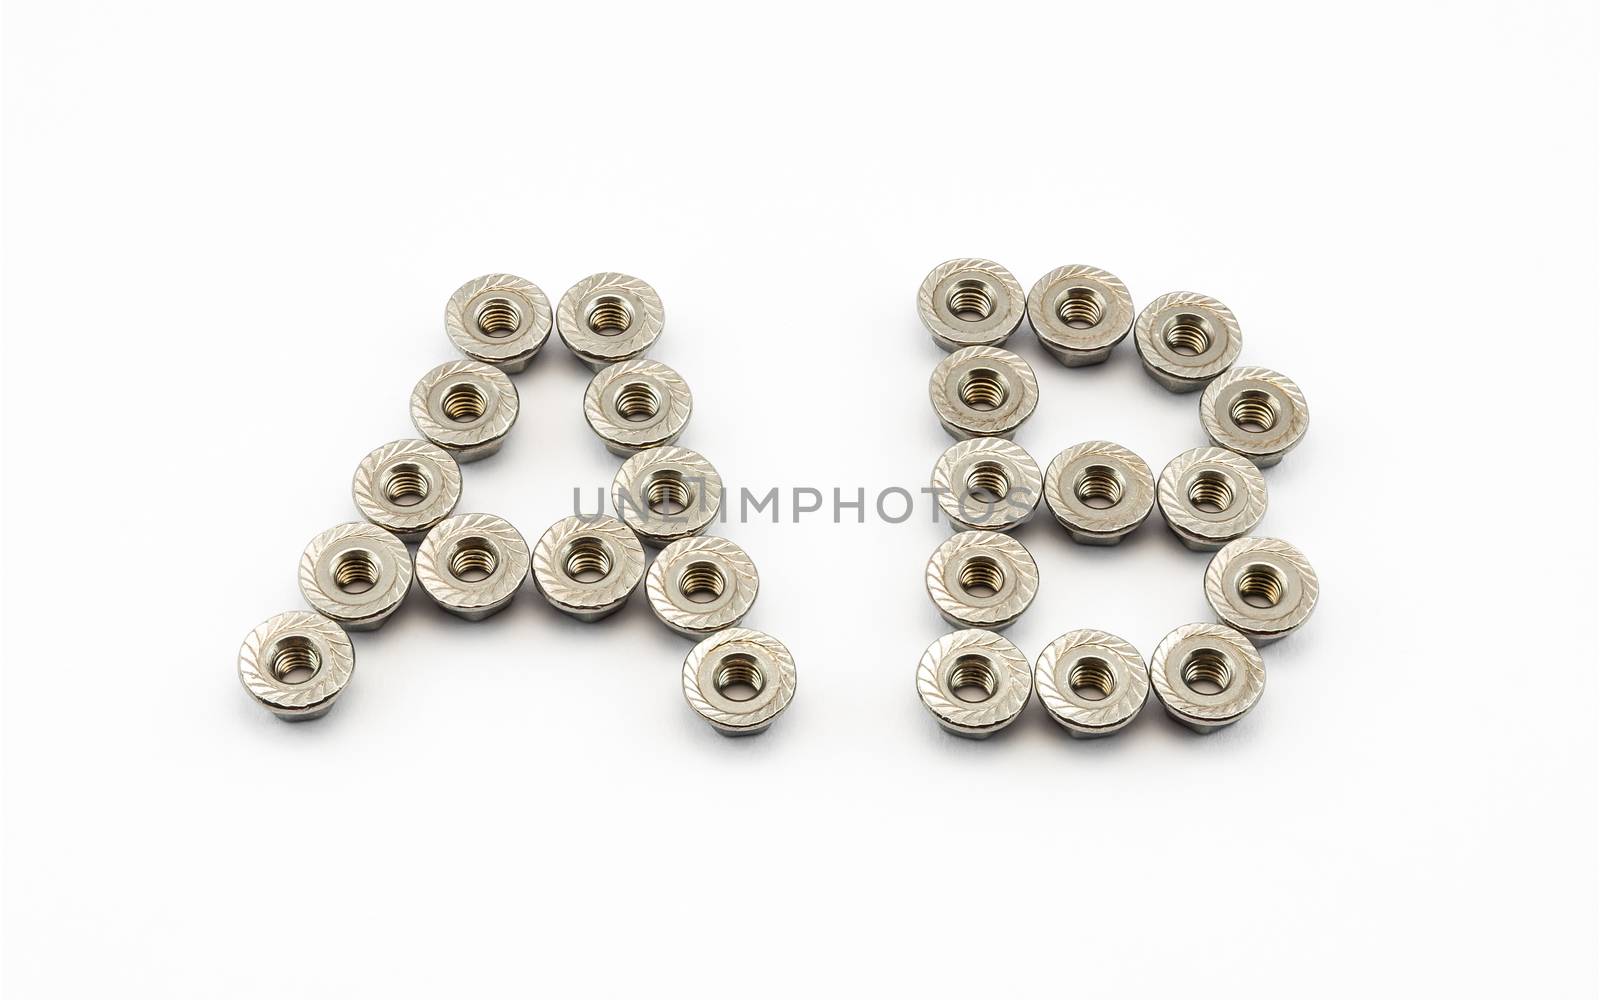 A and B Alphabet, Created by Stainless Steel Hex Flange Nuts.